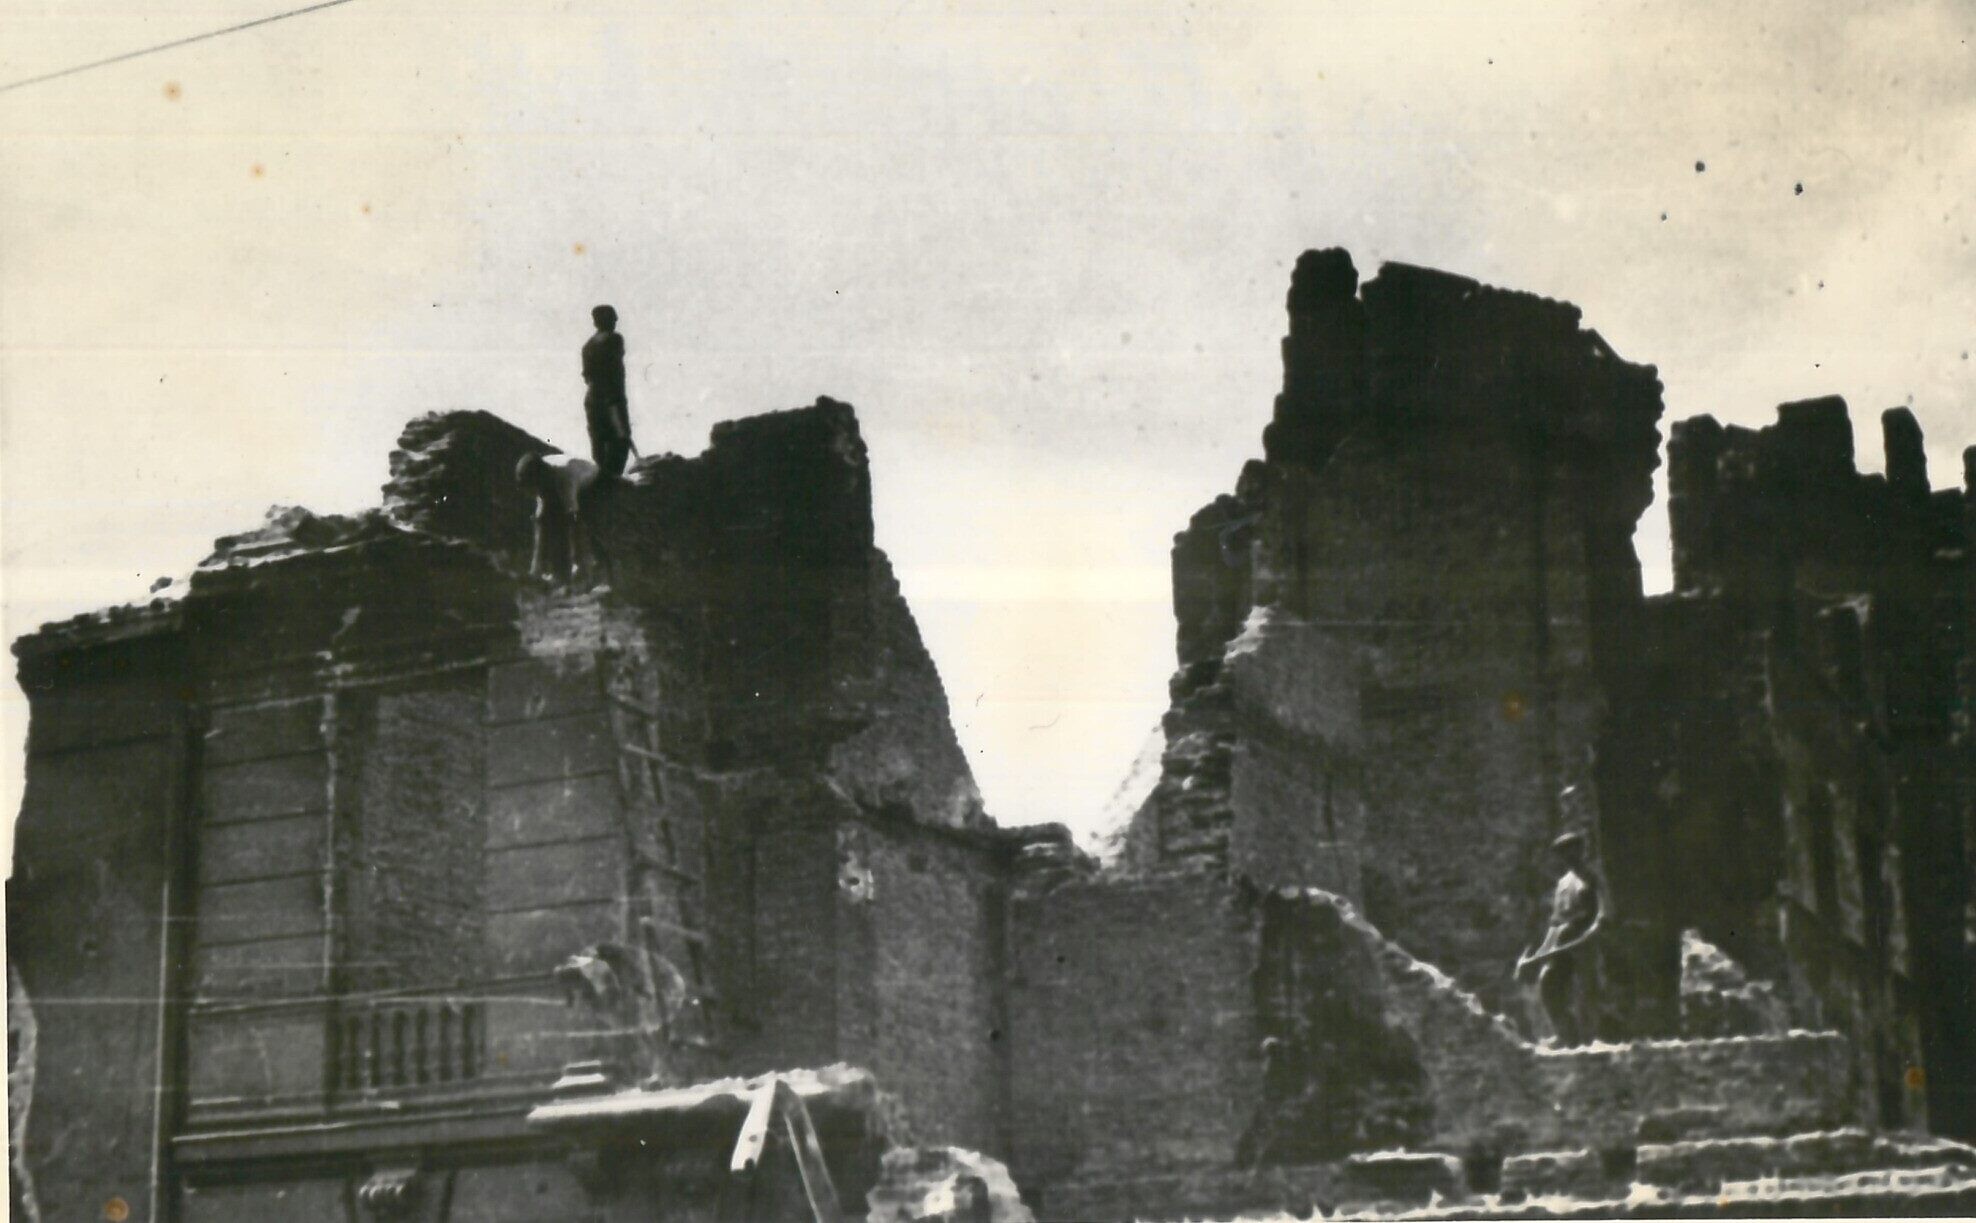 The ruins of the Warsaw Ghetto at Lezsno 42 Street, photographed by Stefan Bałuk. (Wiener Holocaust Library Collections)